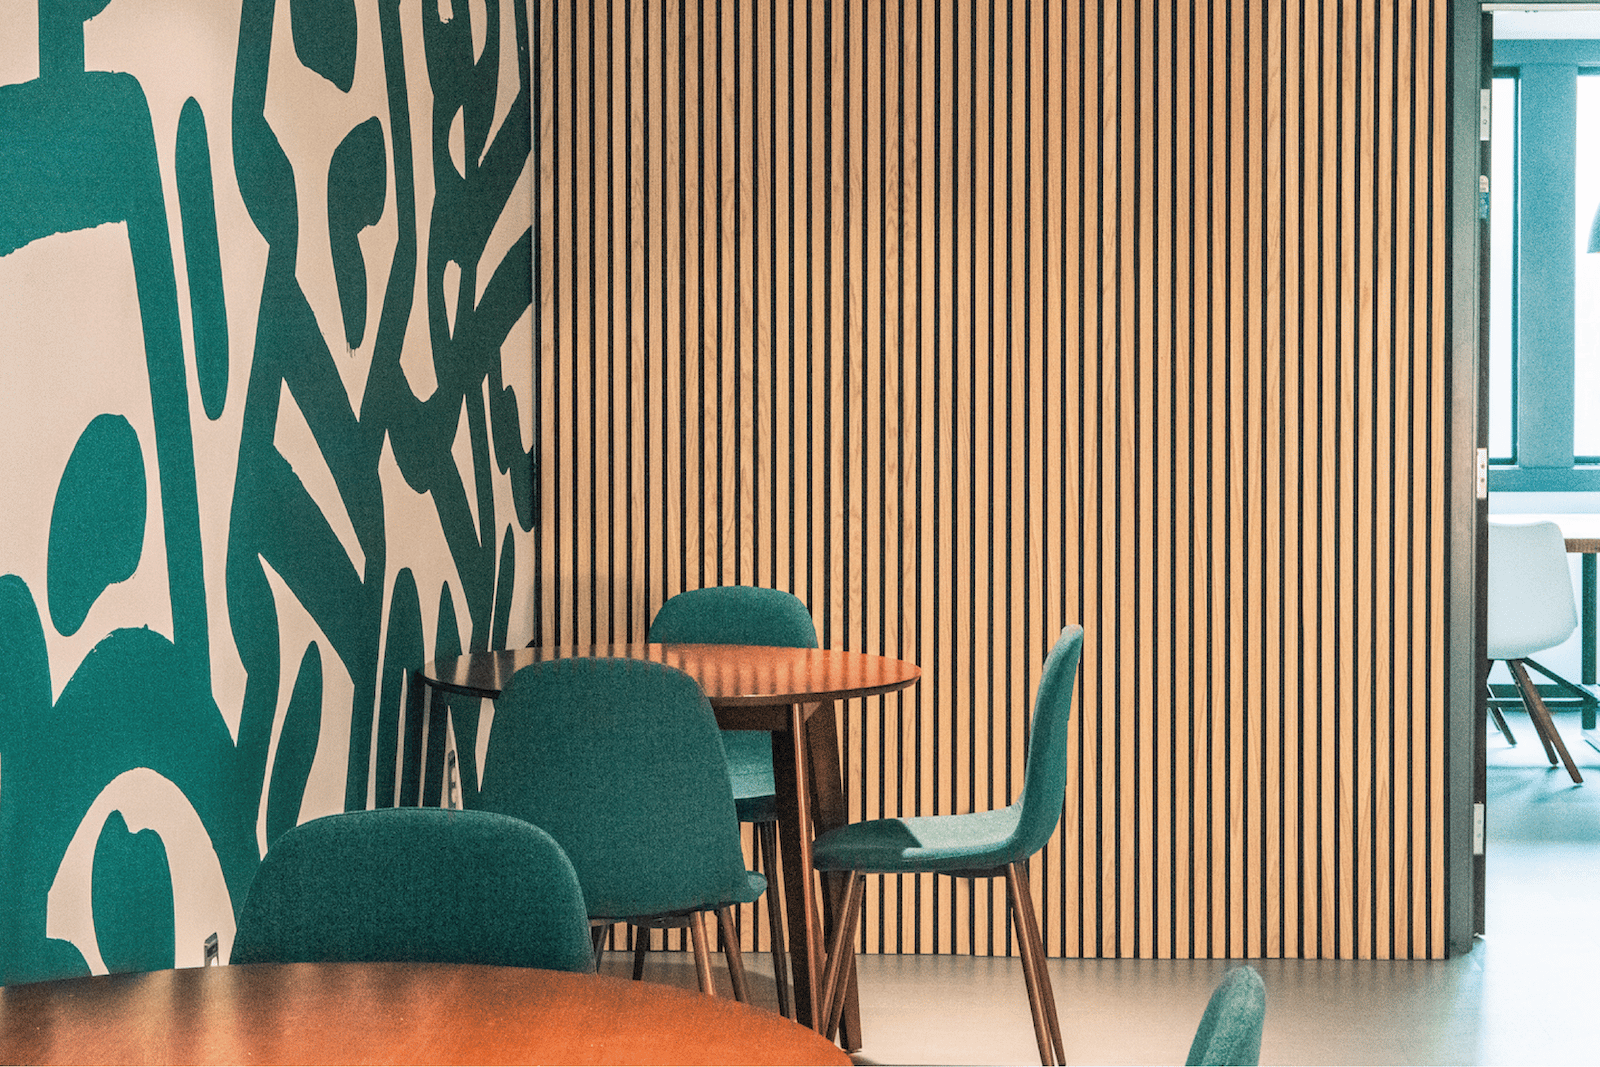 Acoustic wood fluted panels in cafe